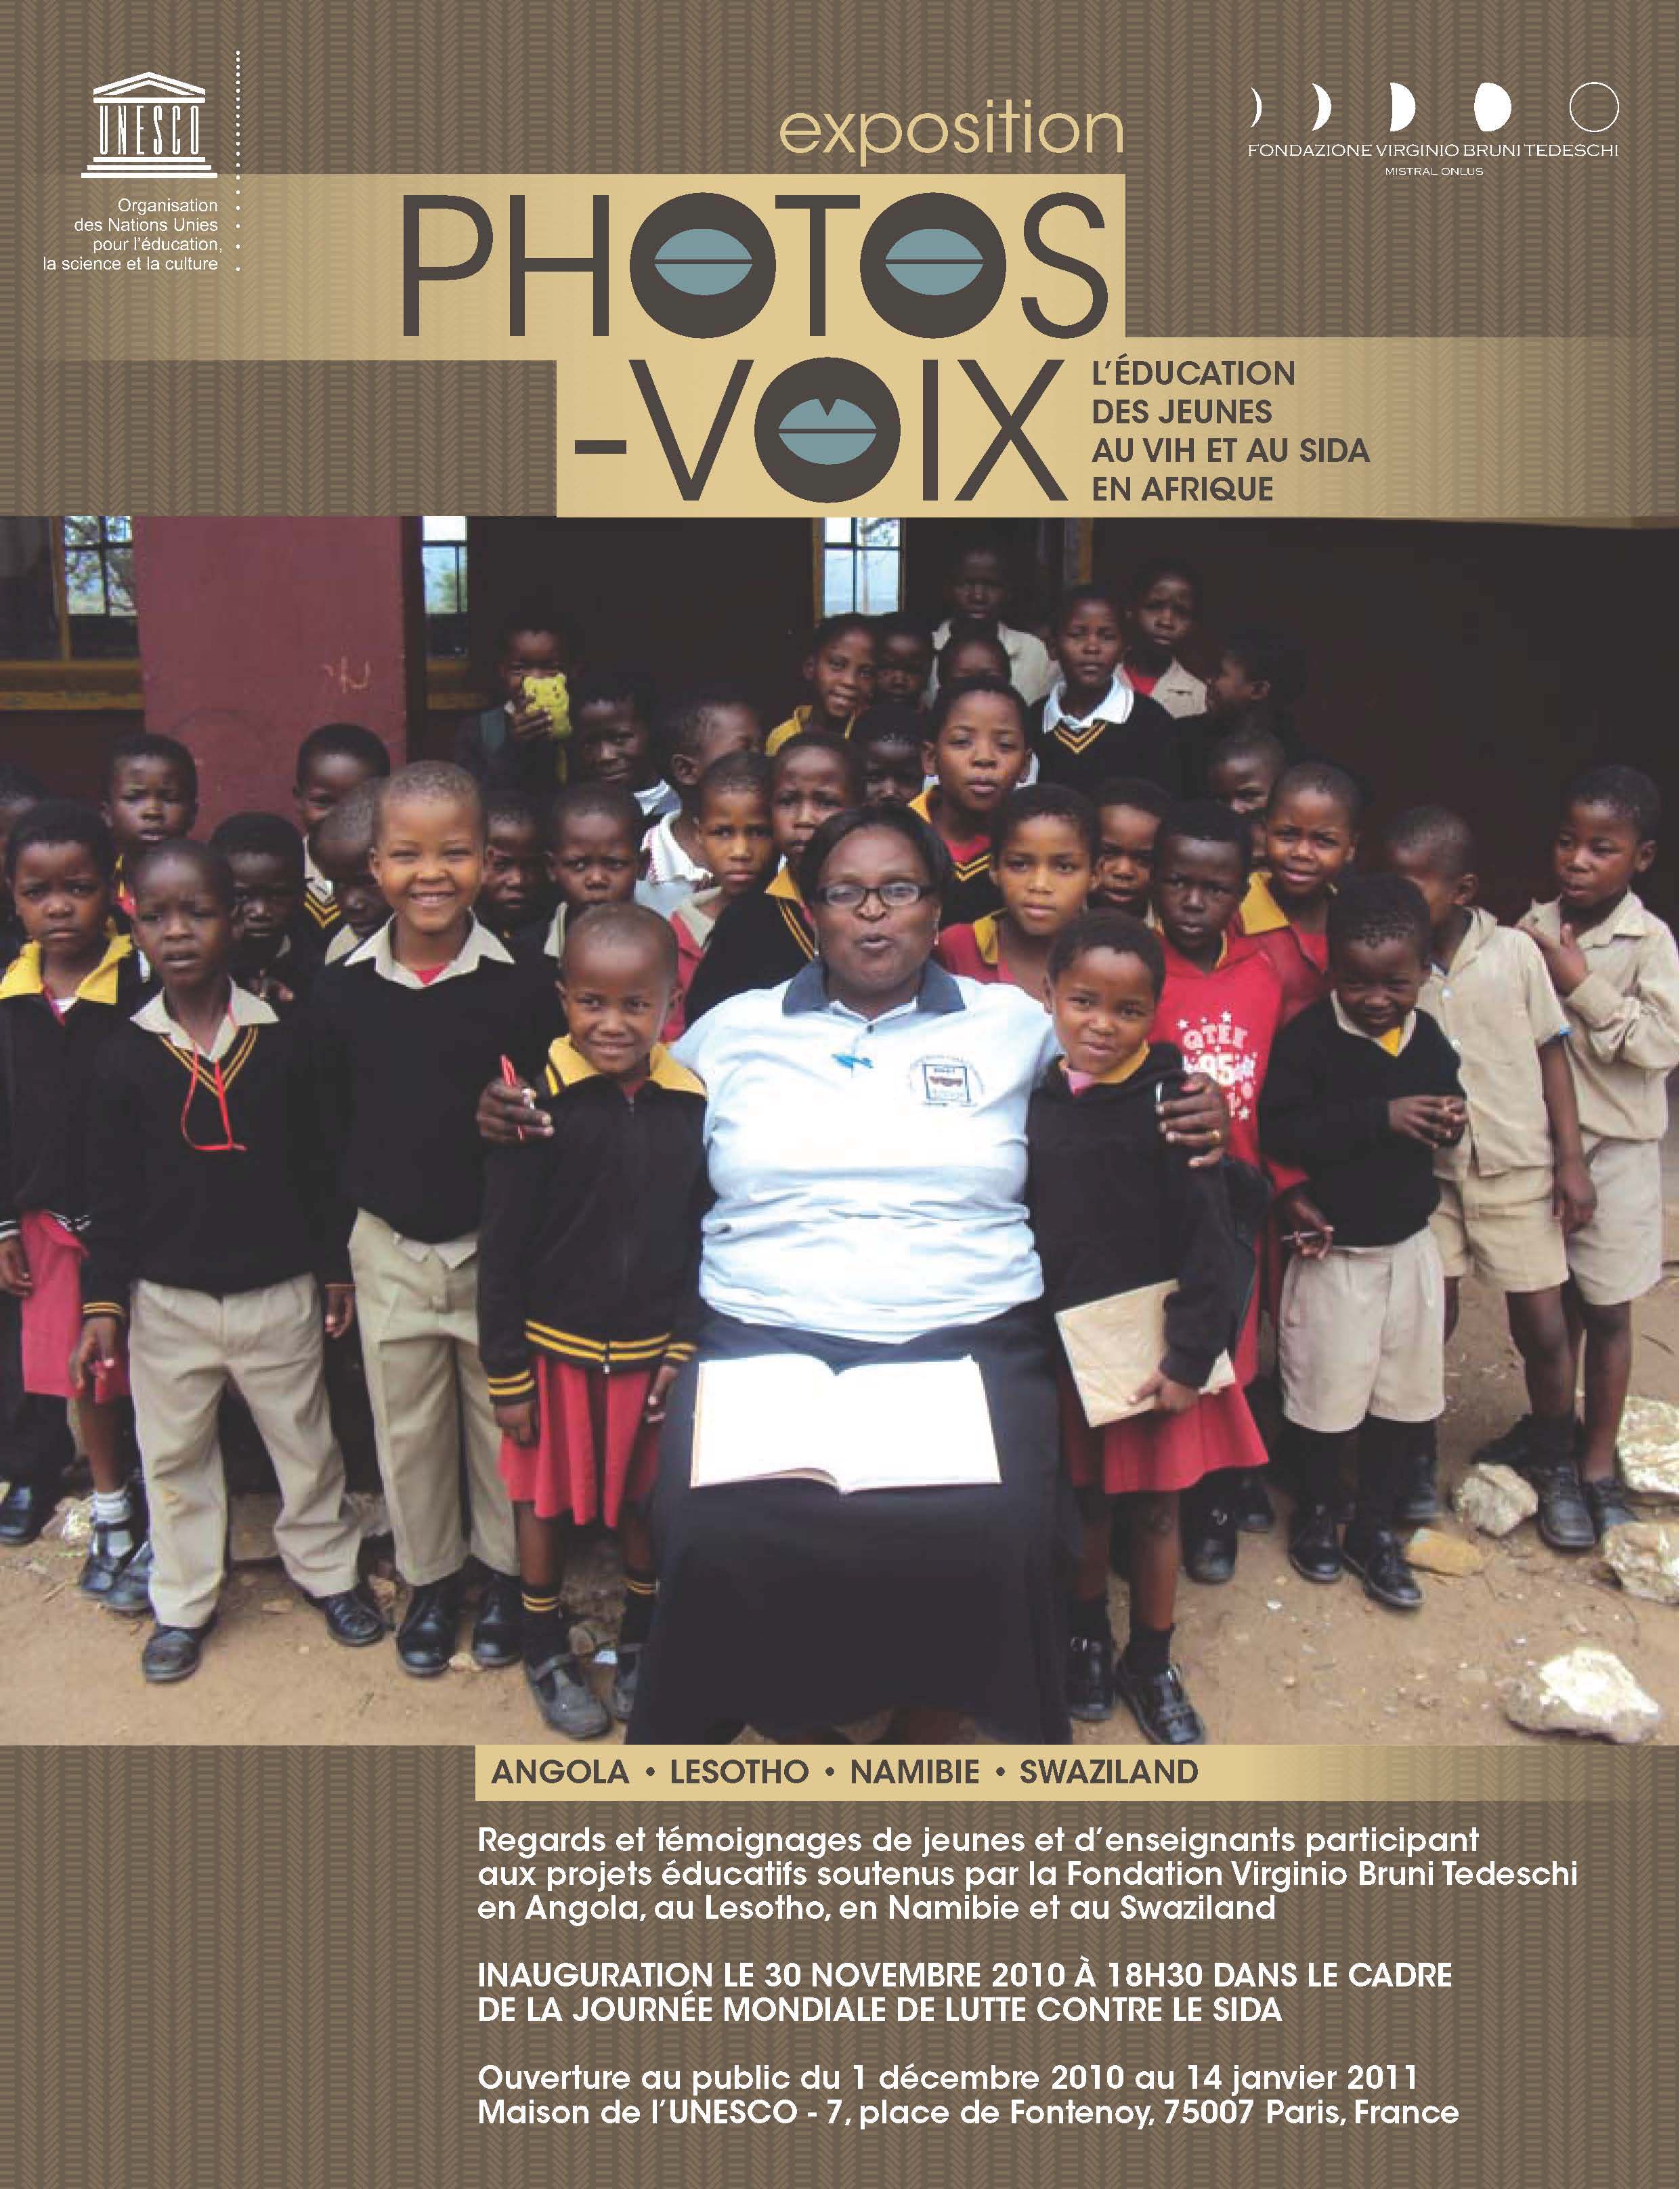 Photo-Voice: HIV and AIDS Education for African Youth